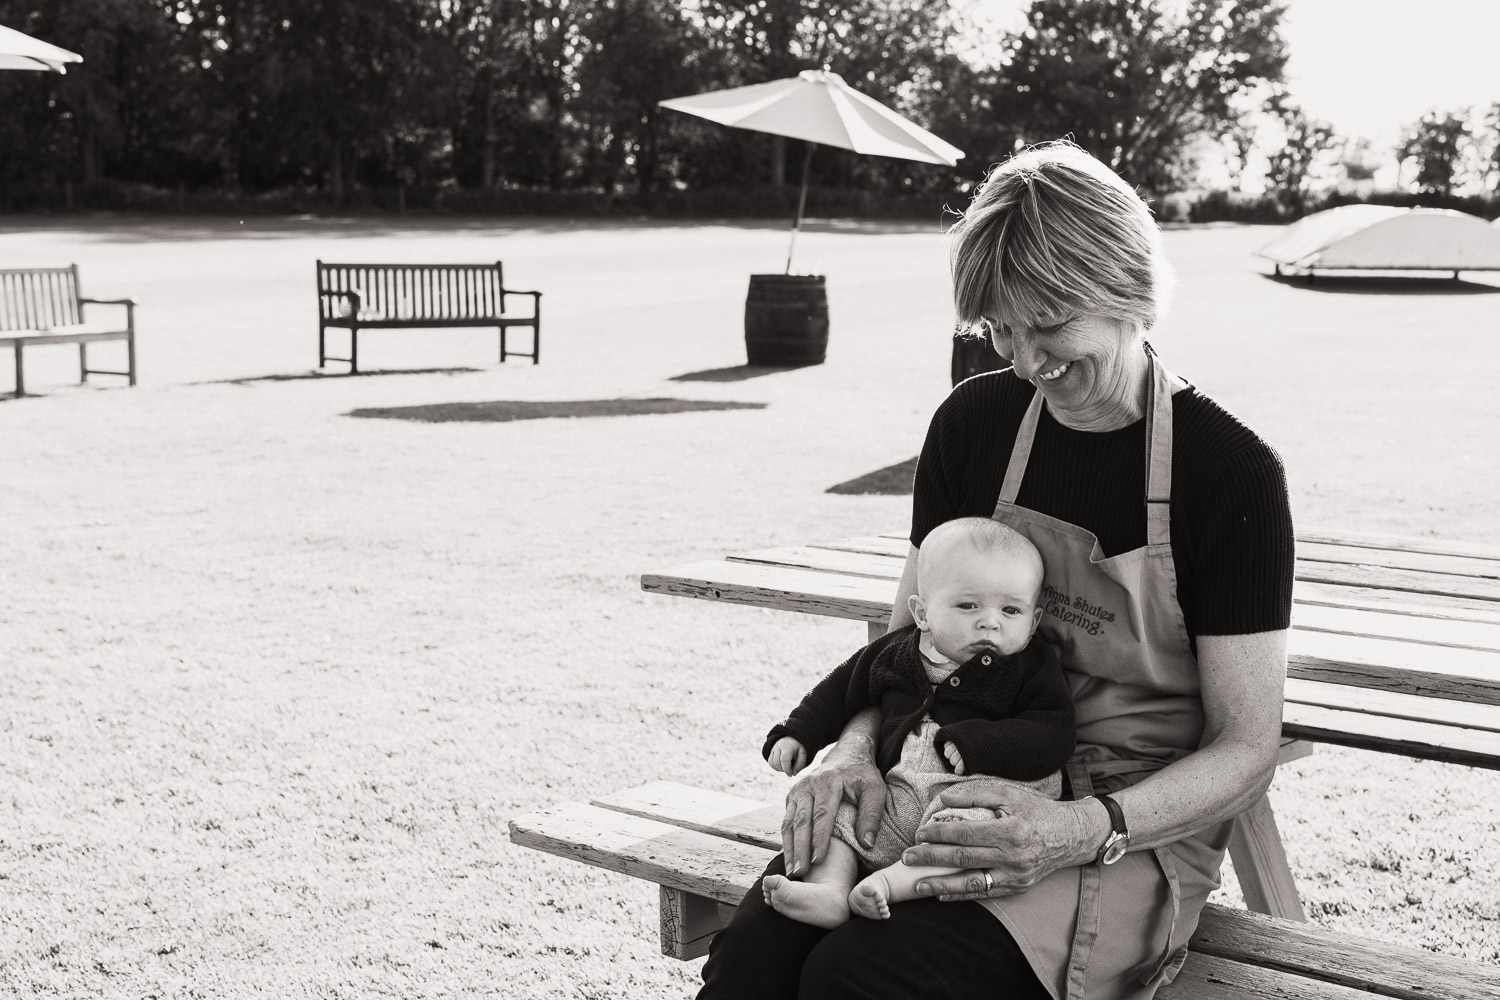 Bridget of Anna Shutes catering keeping a guest's baby occupied during wedding breakfast. Sat on a picnic table outside the marquee.